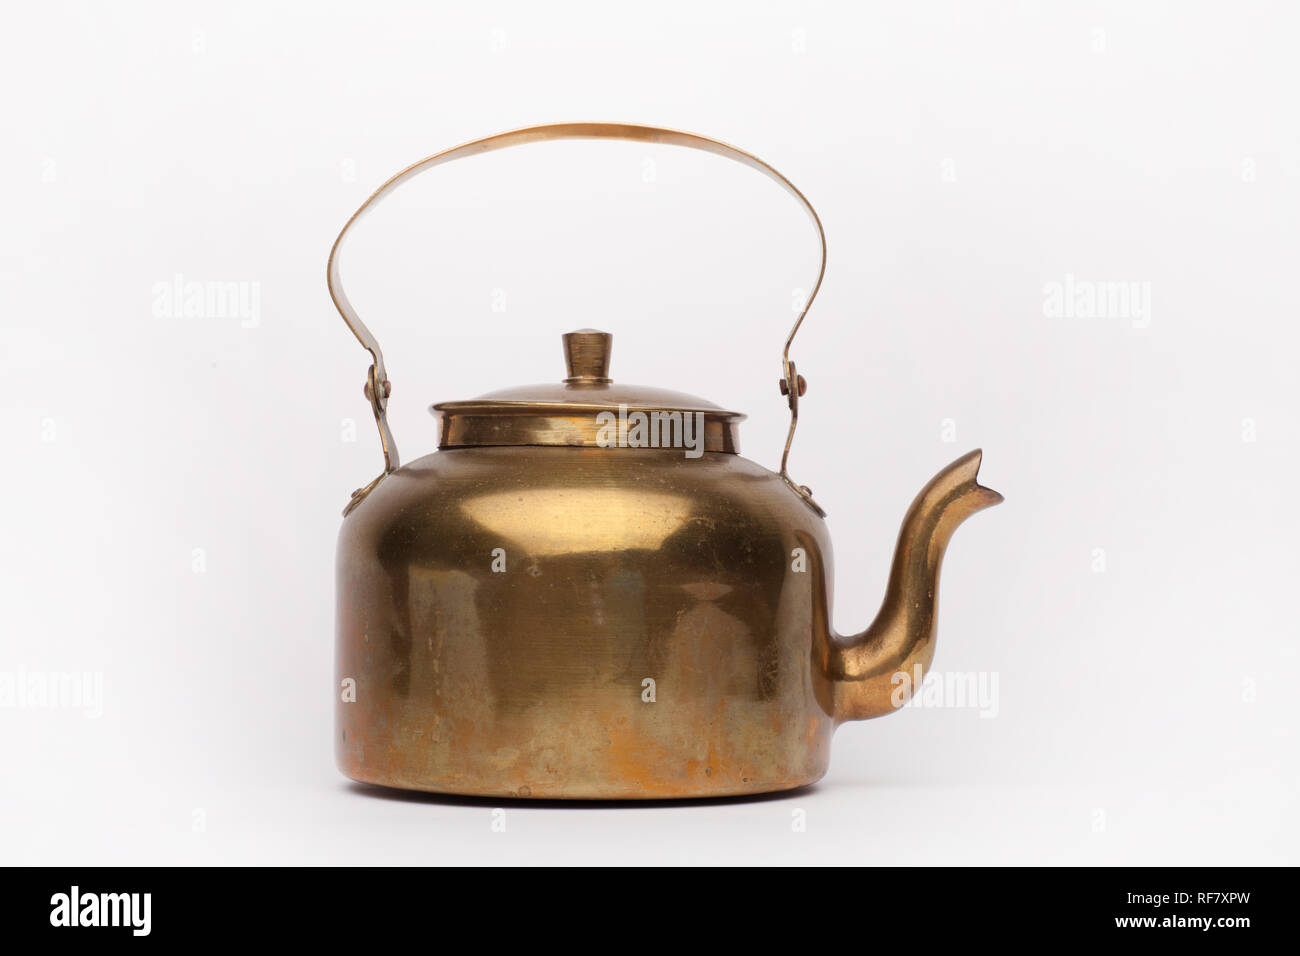 https://c8.alamy.com/comp/RF7XPW/old-brass-teapot-on-the-white-background-isolated-RF7XPW.jpg